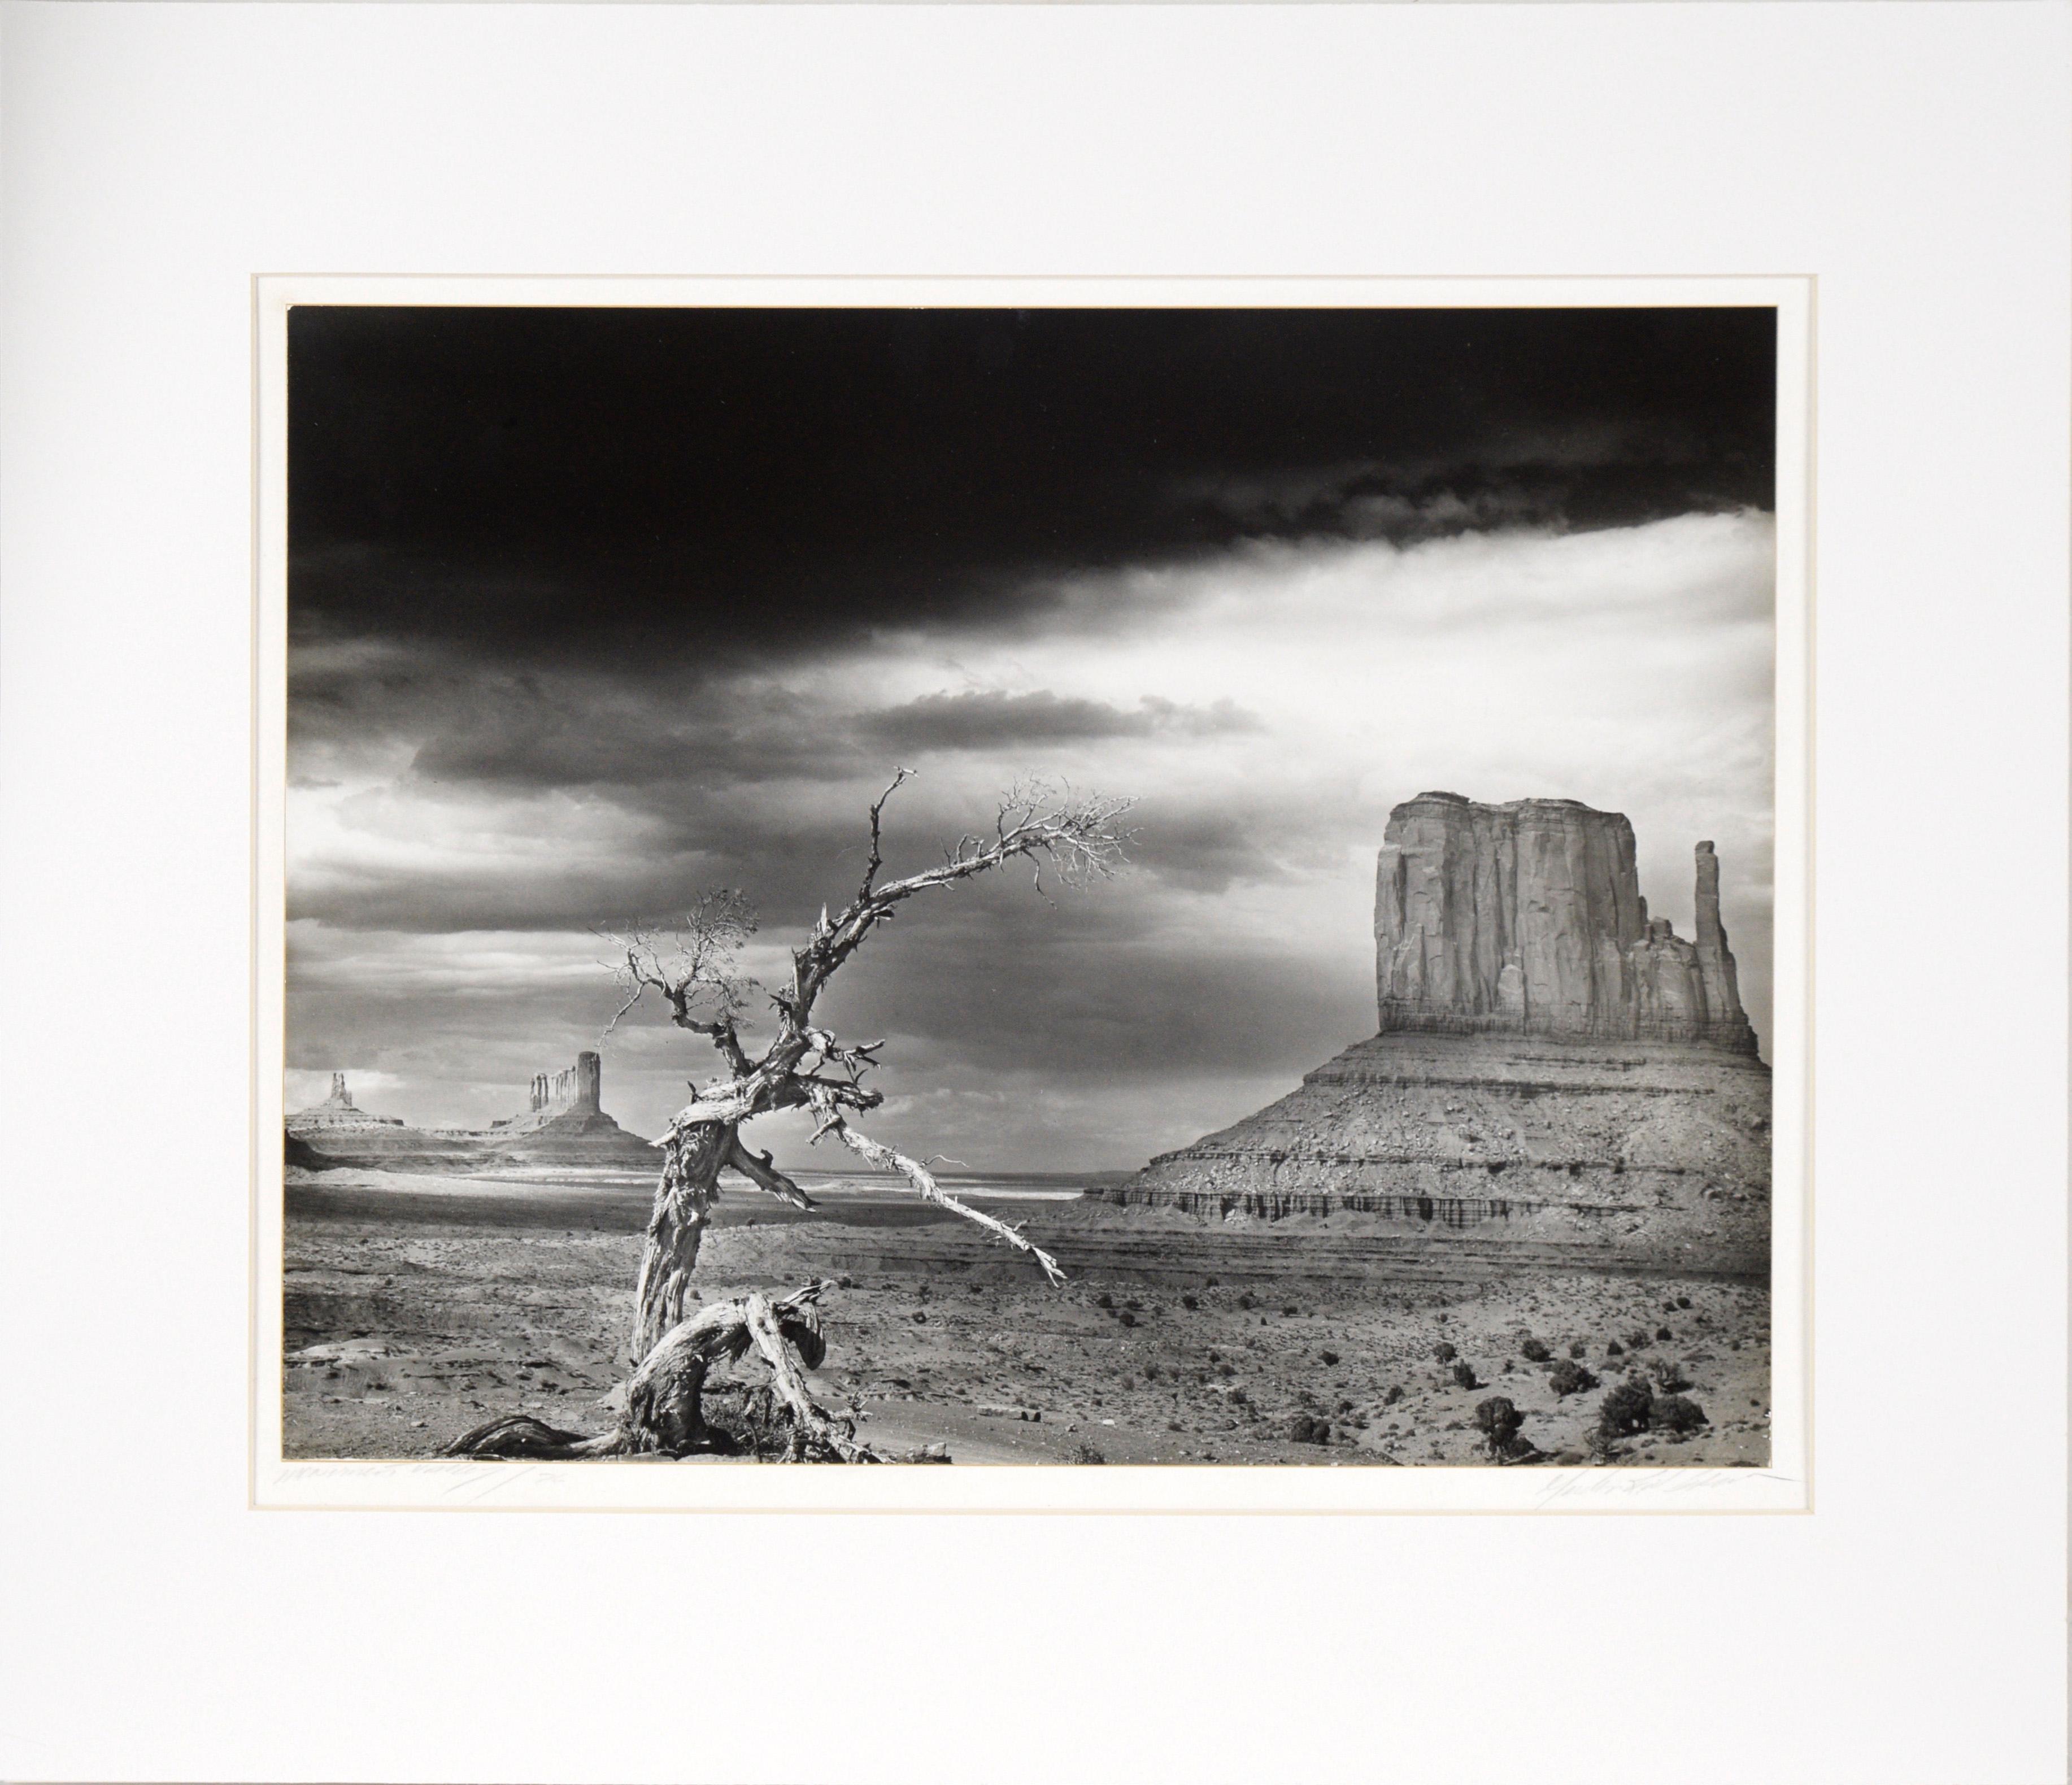 "Monument Valley" Black and White Photograph

Stunning photograph of Monument Valley, Utah, by an unknown artist (20th Century). A gnarled, dead tree is in the foreground, with white bark that stands out against the darker background. The iconic